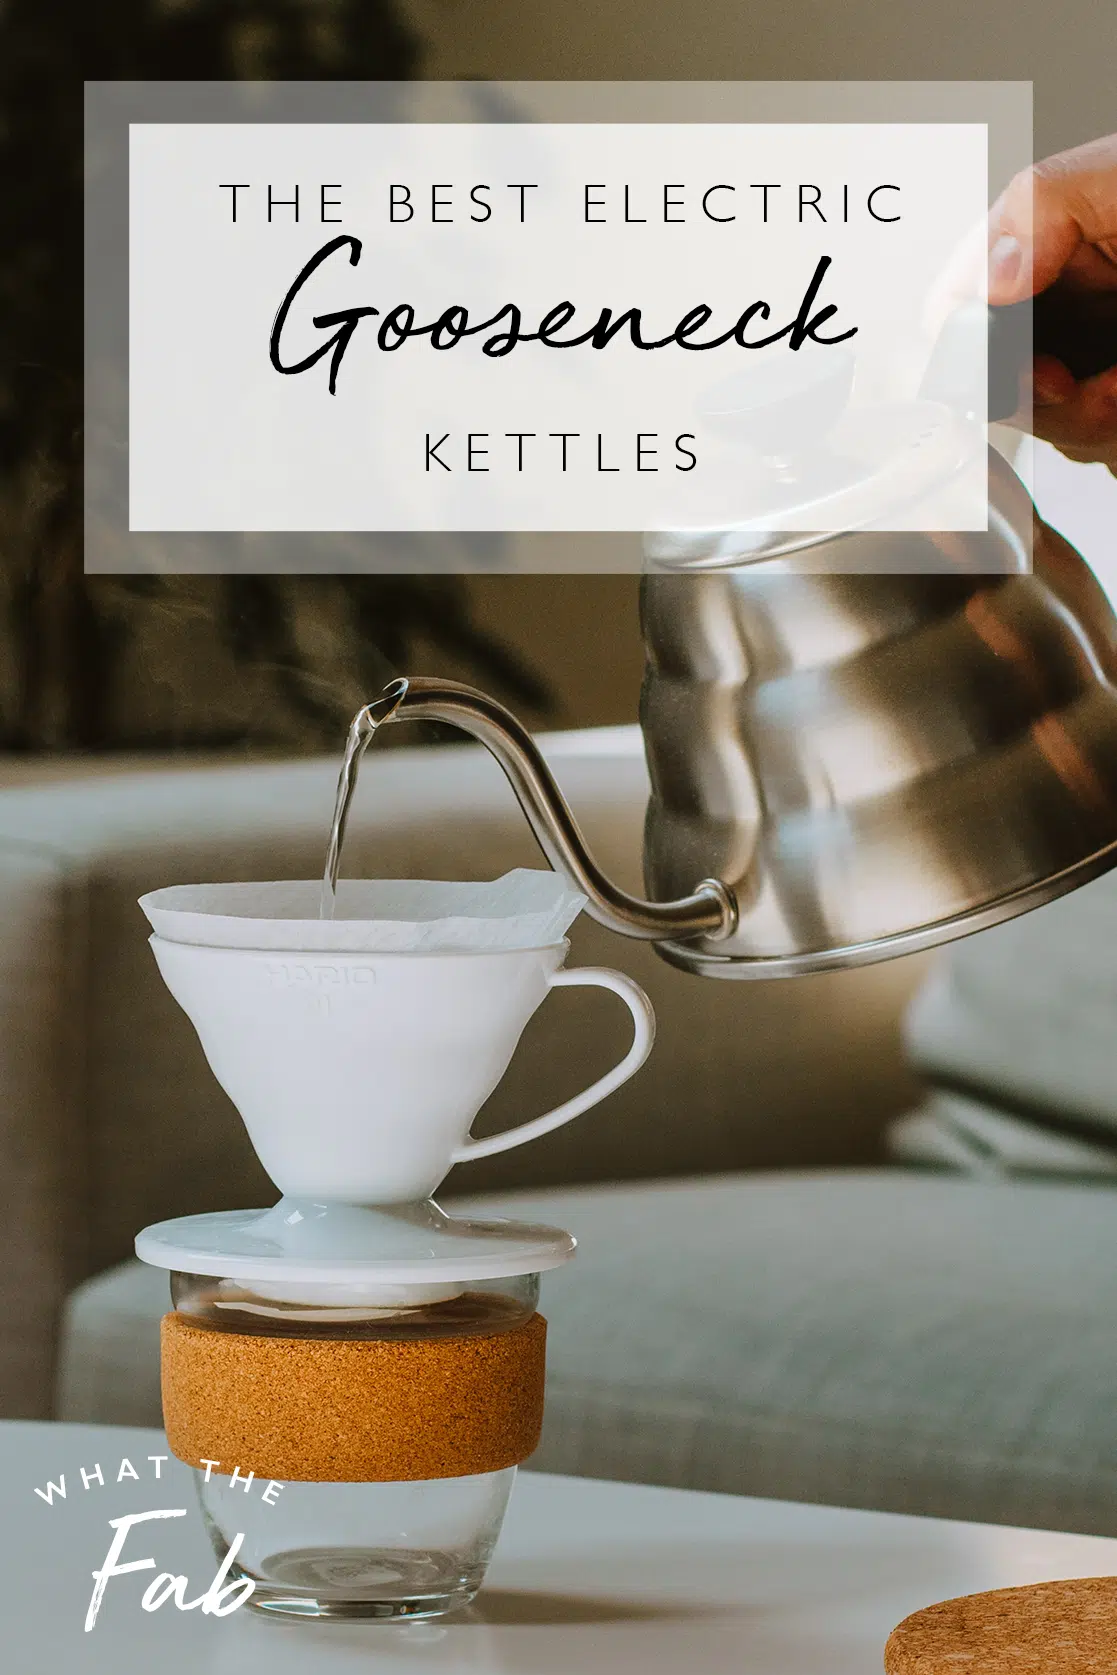 Pour Over Gooseneck Kettle by Alpha & Sigma [Includes Free eBook